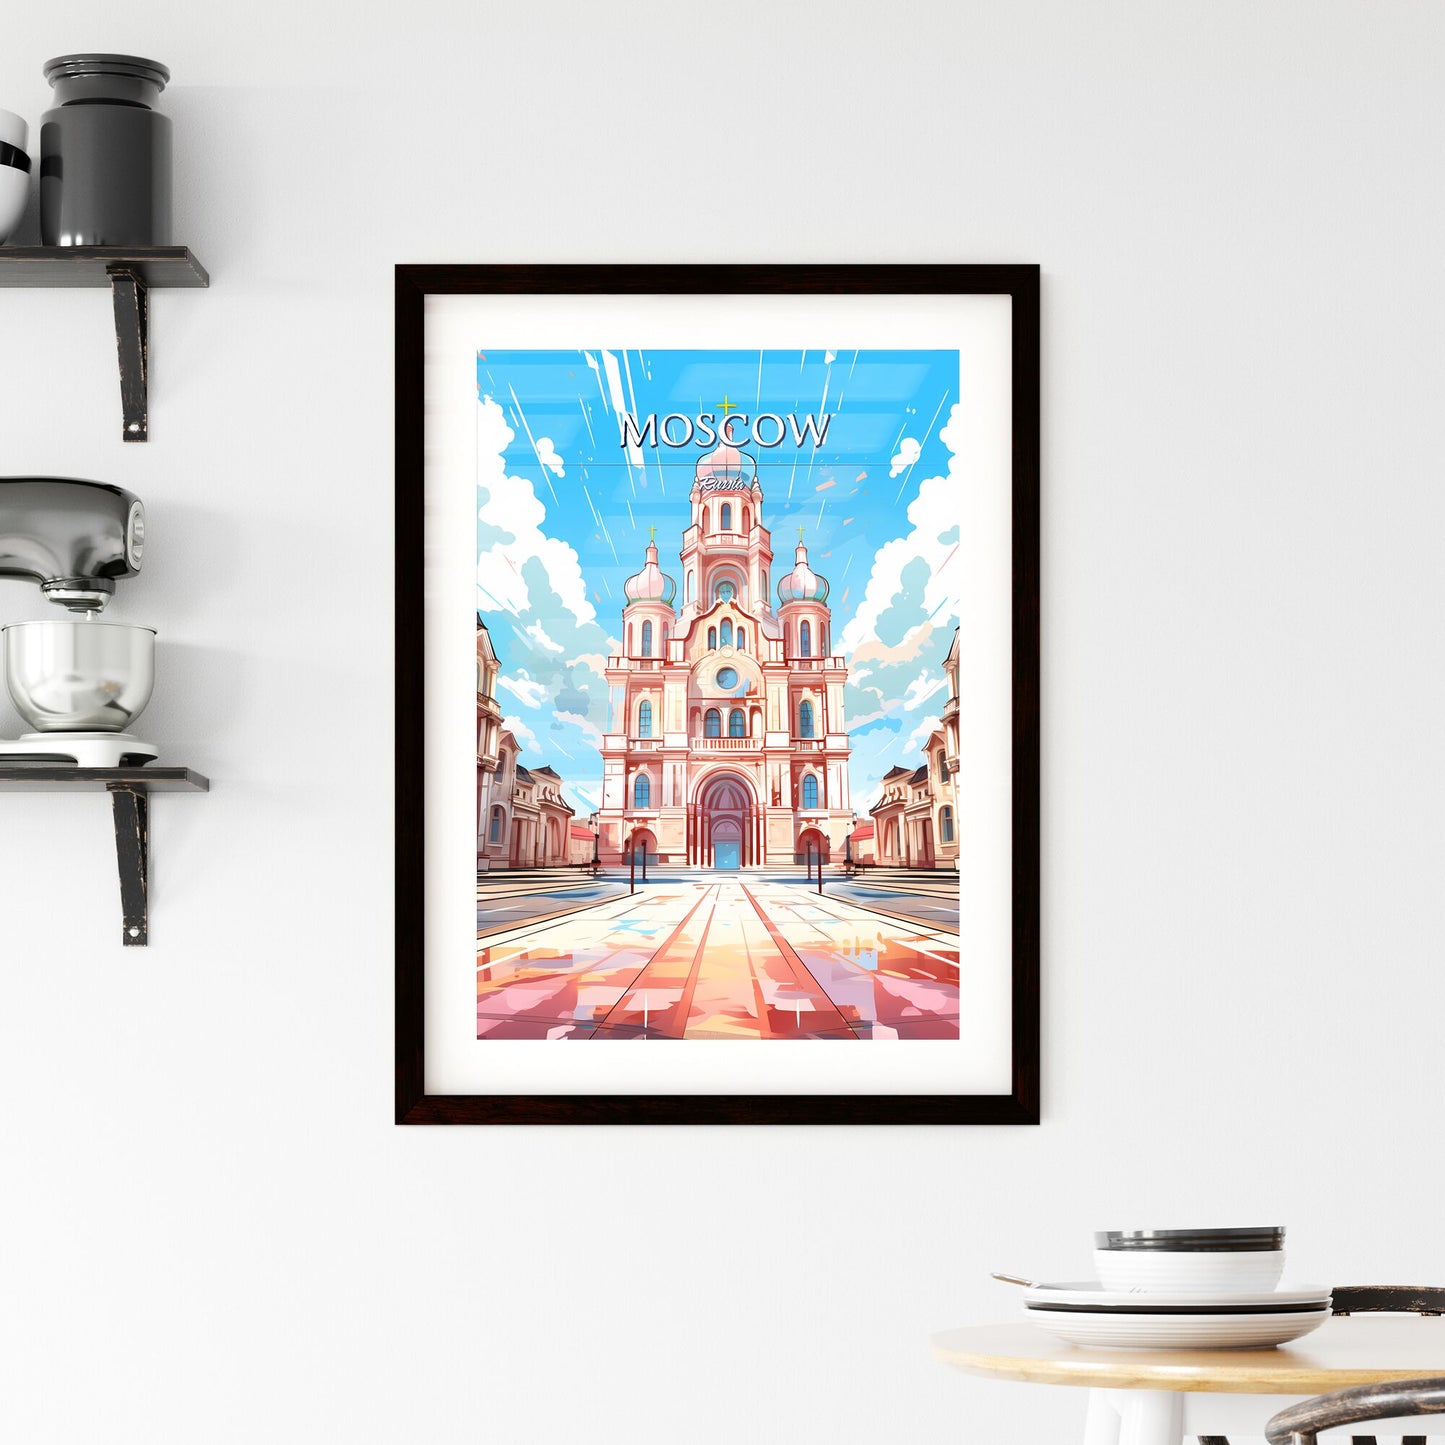 Moscow, Russia - Art print of a large building with a dome roof and a large courtyard Default Title